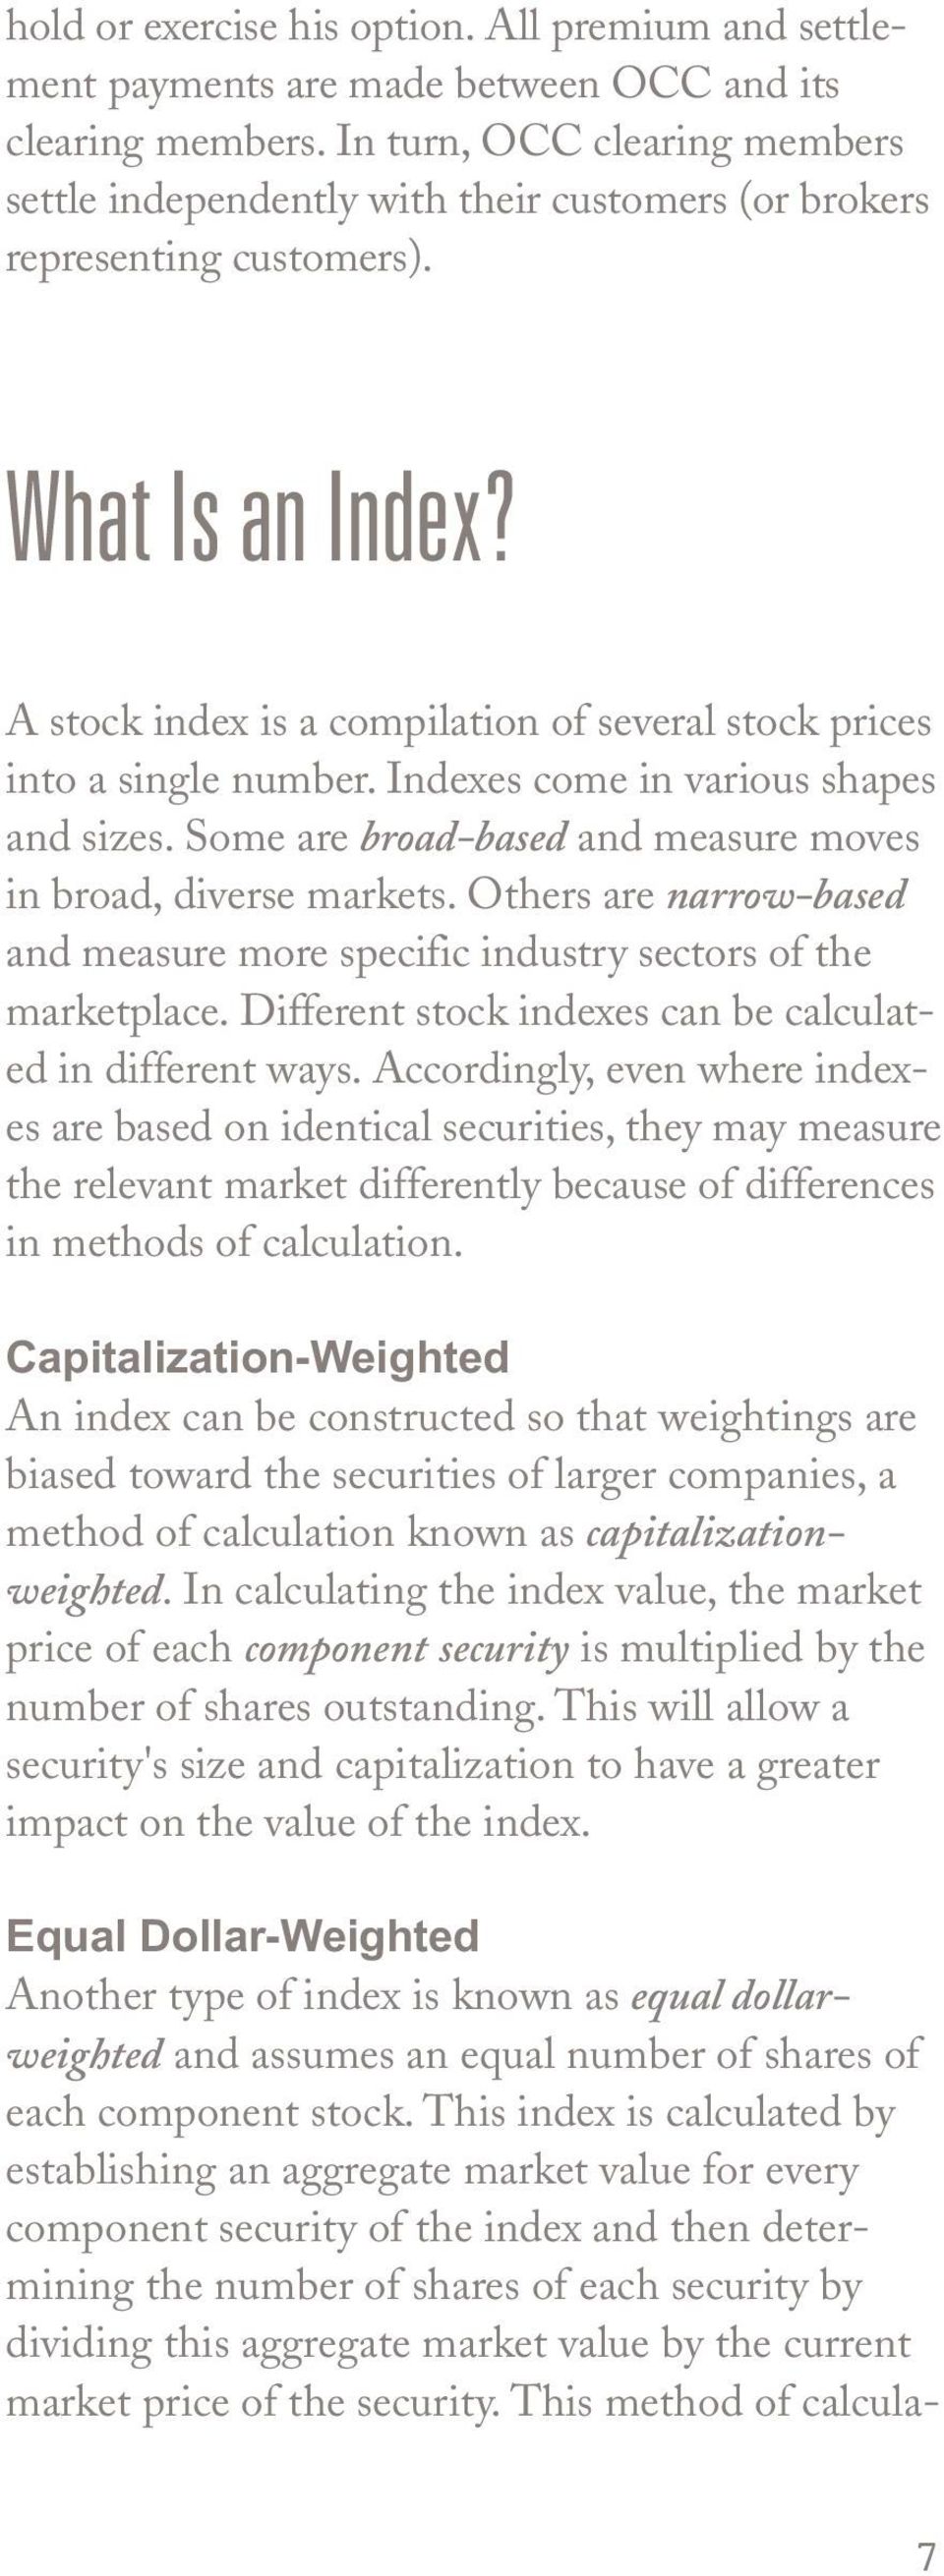 A stock index is a compilation of several stock prices into a single number. Indexes come in various shapes and sizes. Some are broad-based and measure moves in broad, diverse markets.